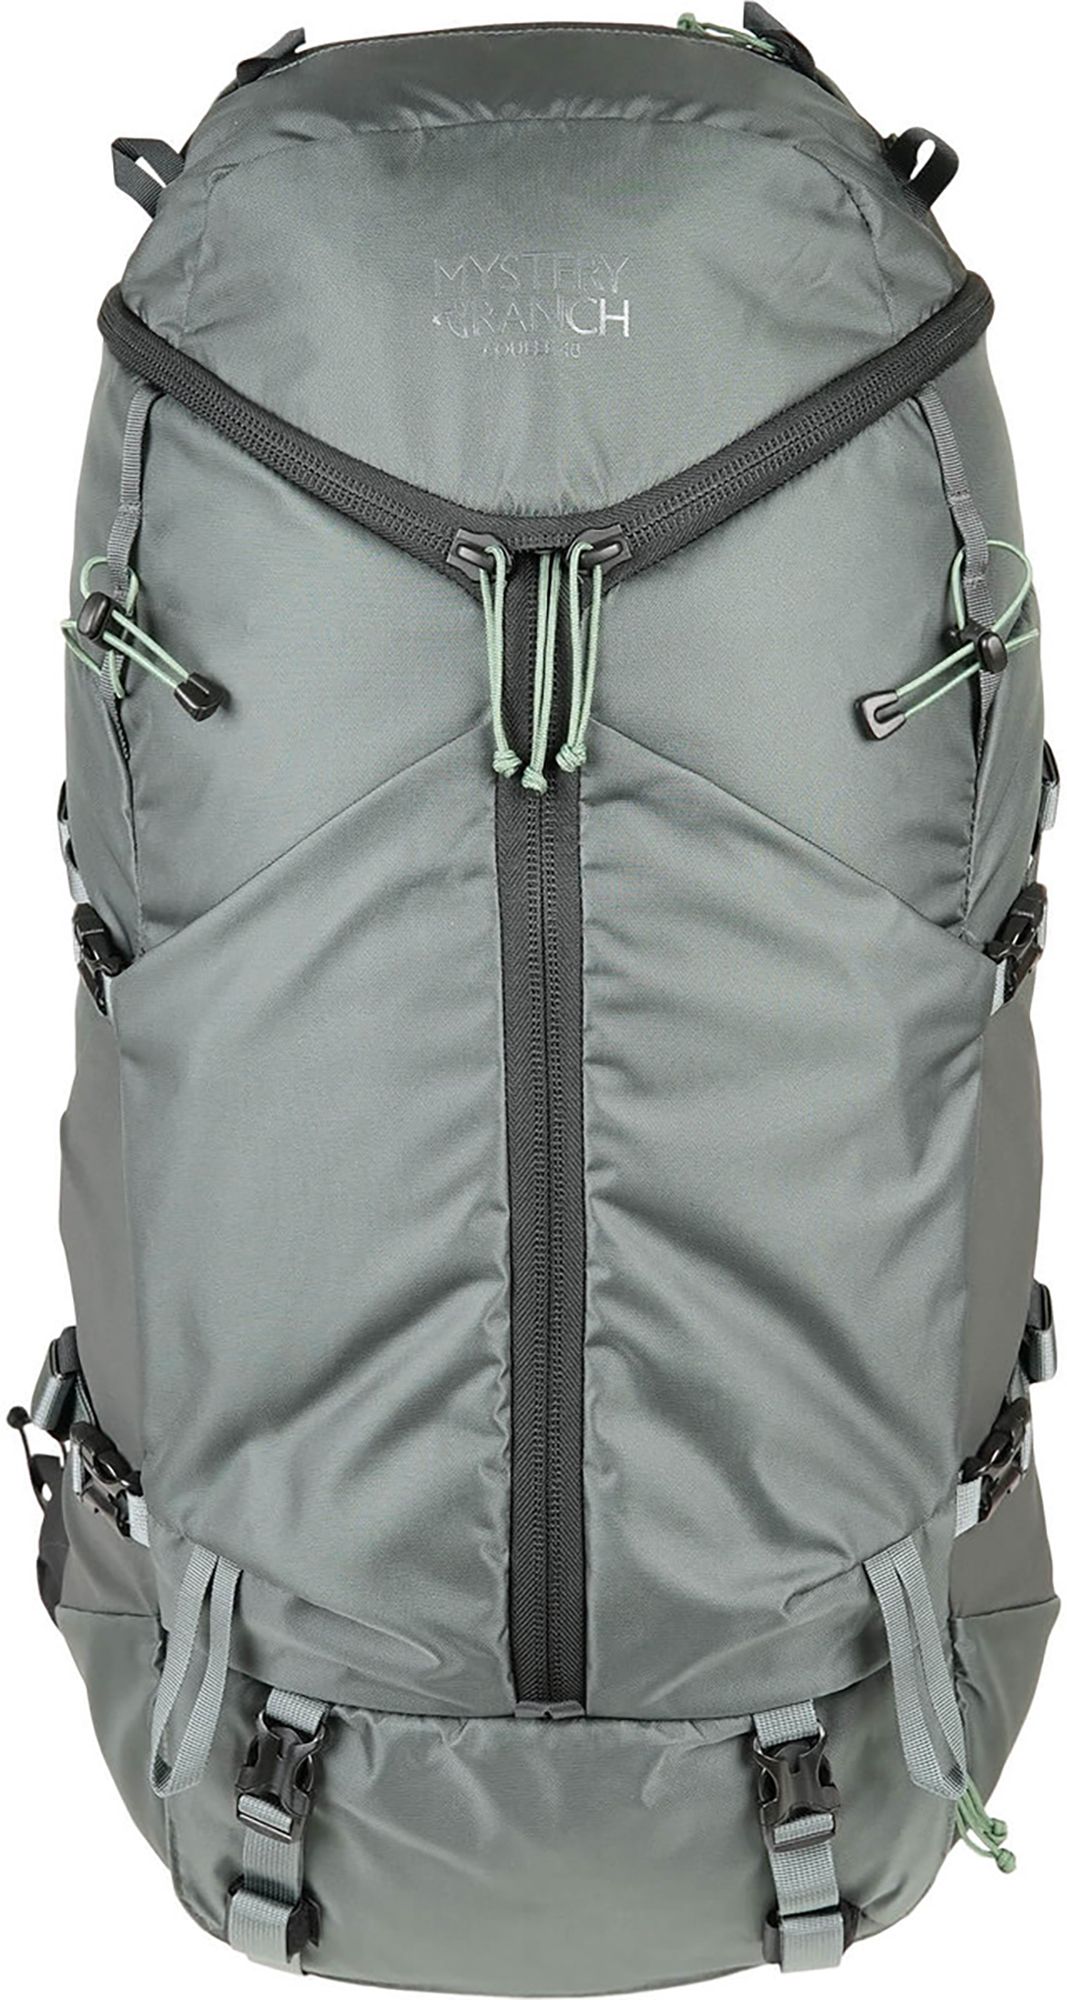 Photos - Outdoor Furniture Mystery Ranch Men's Coulee 40 Backpack, Medium, Mineral Grey 24ZZFMMCL40XX 